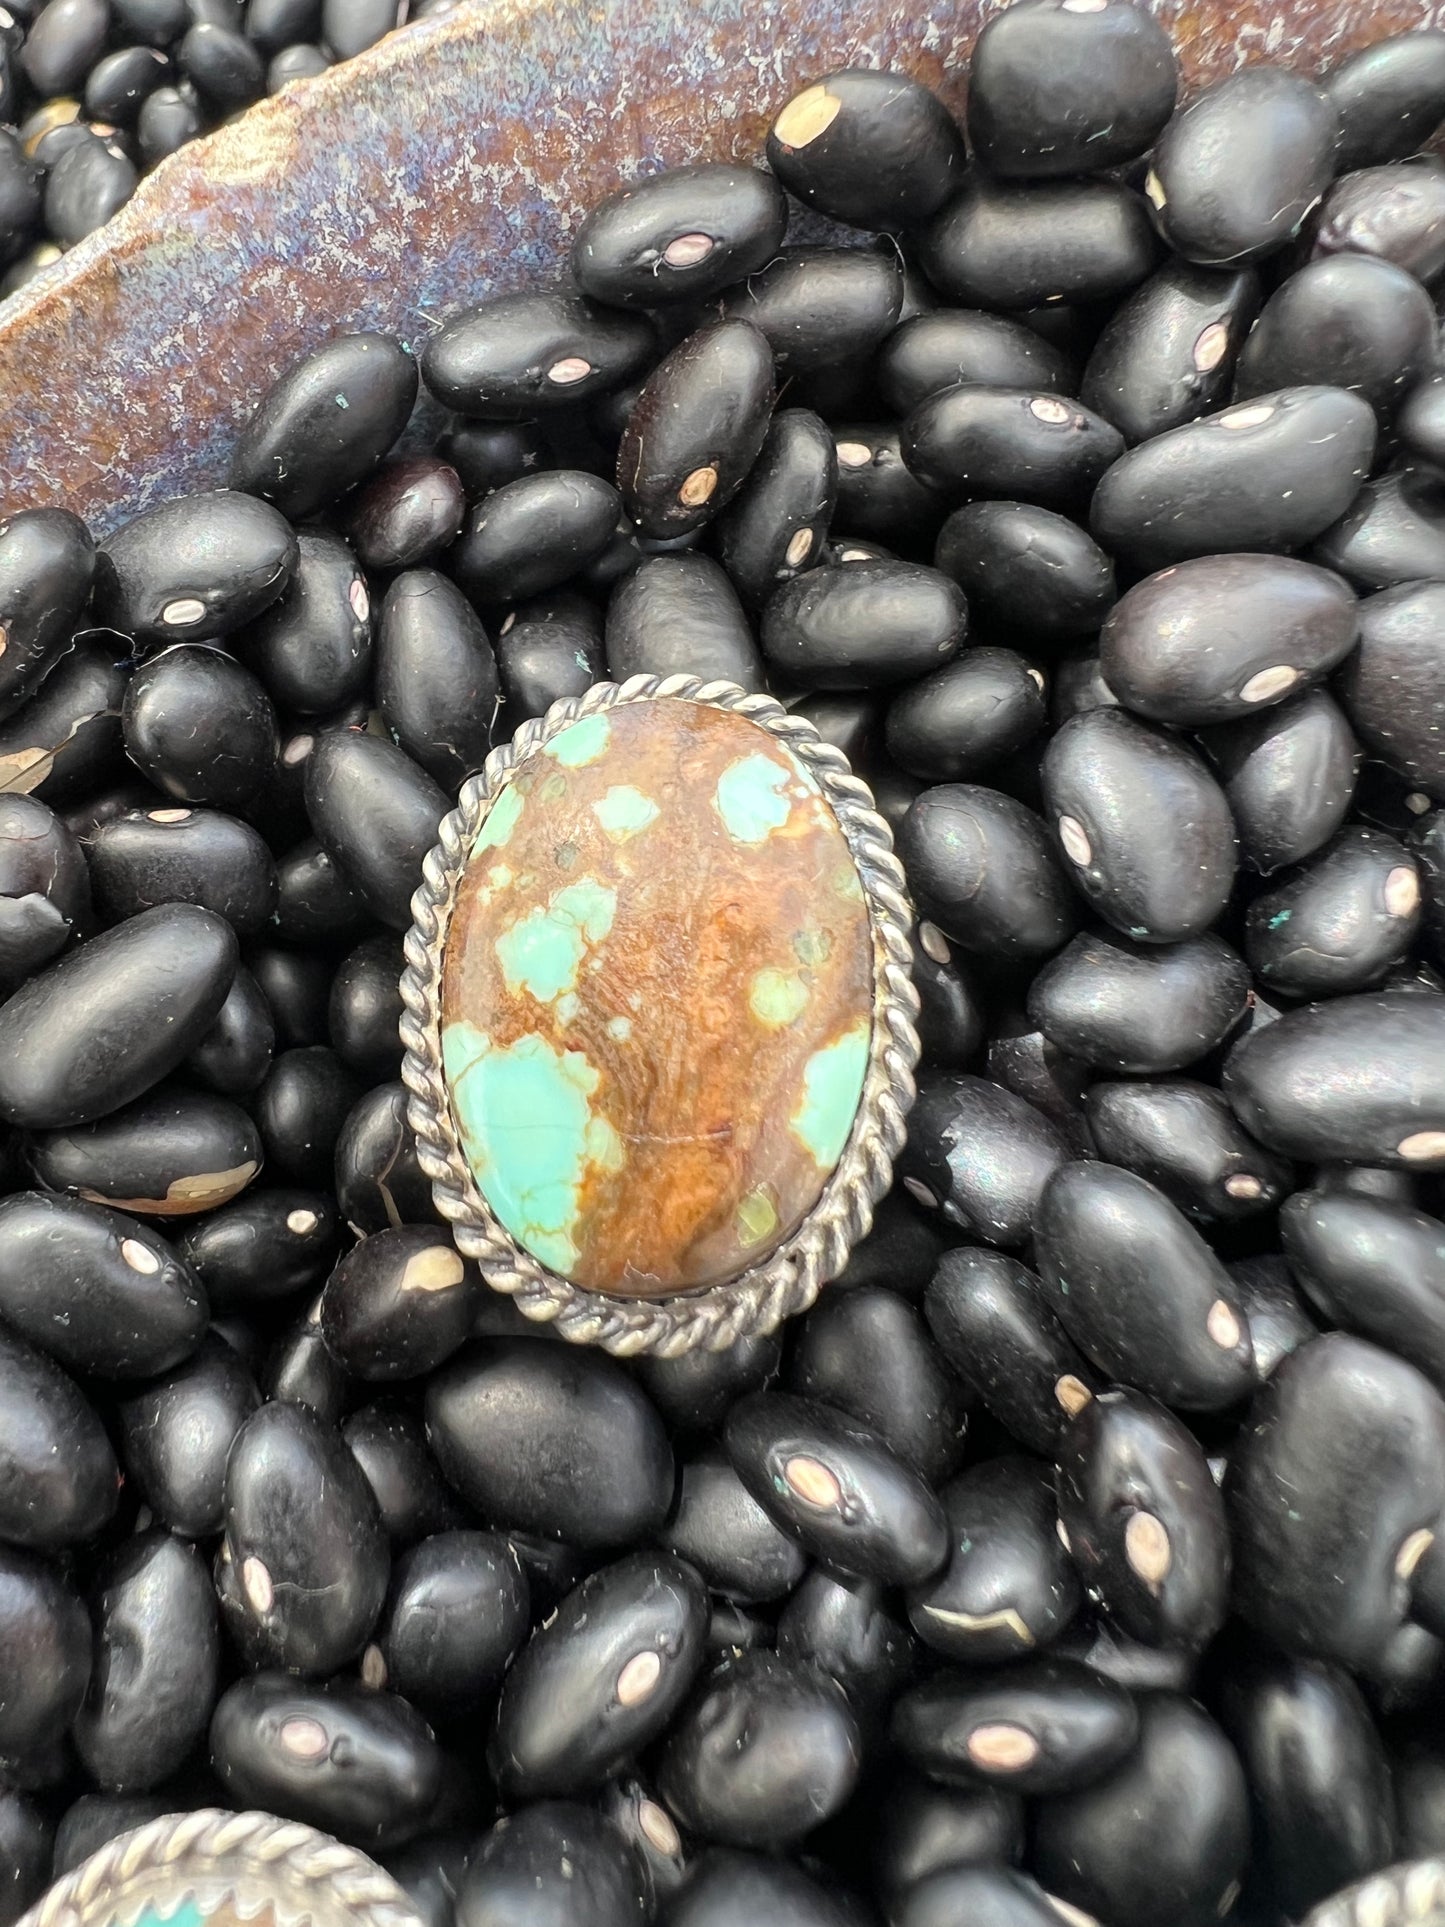 The GOAT turquoise Ring